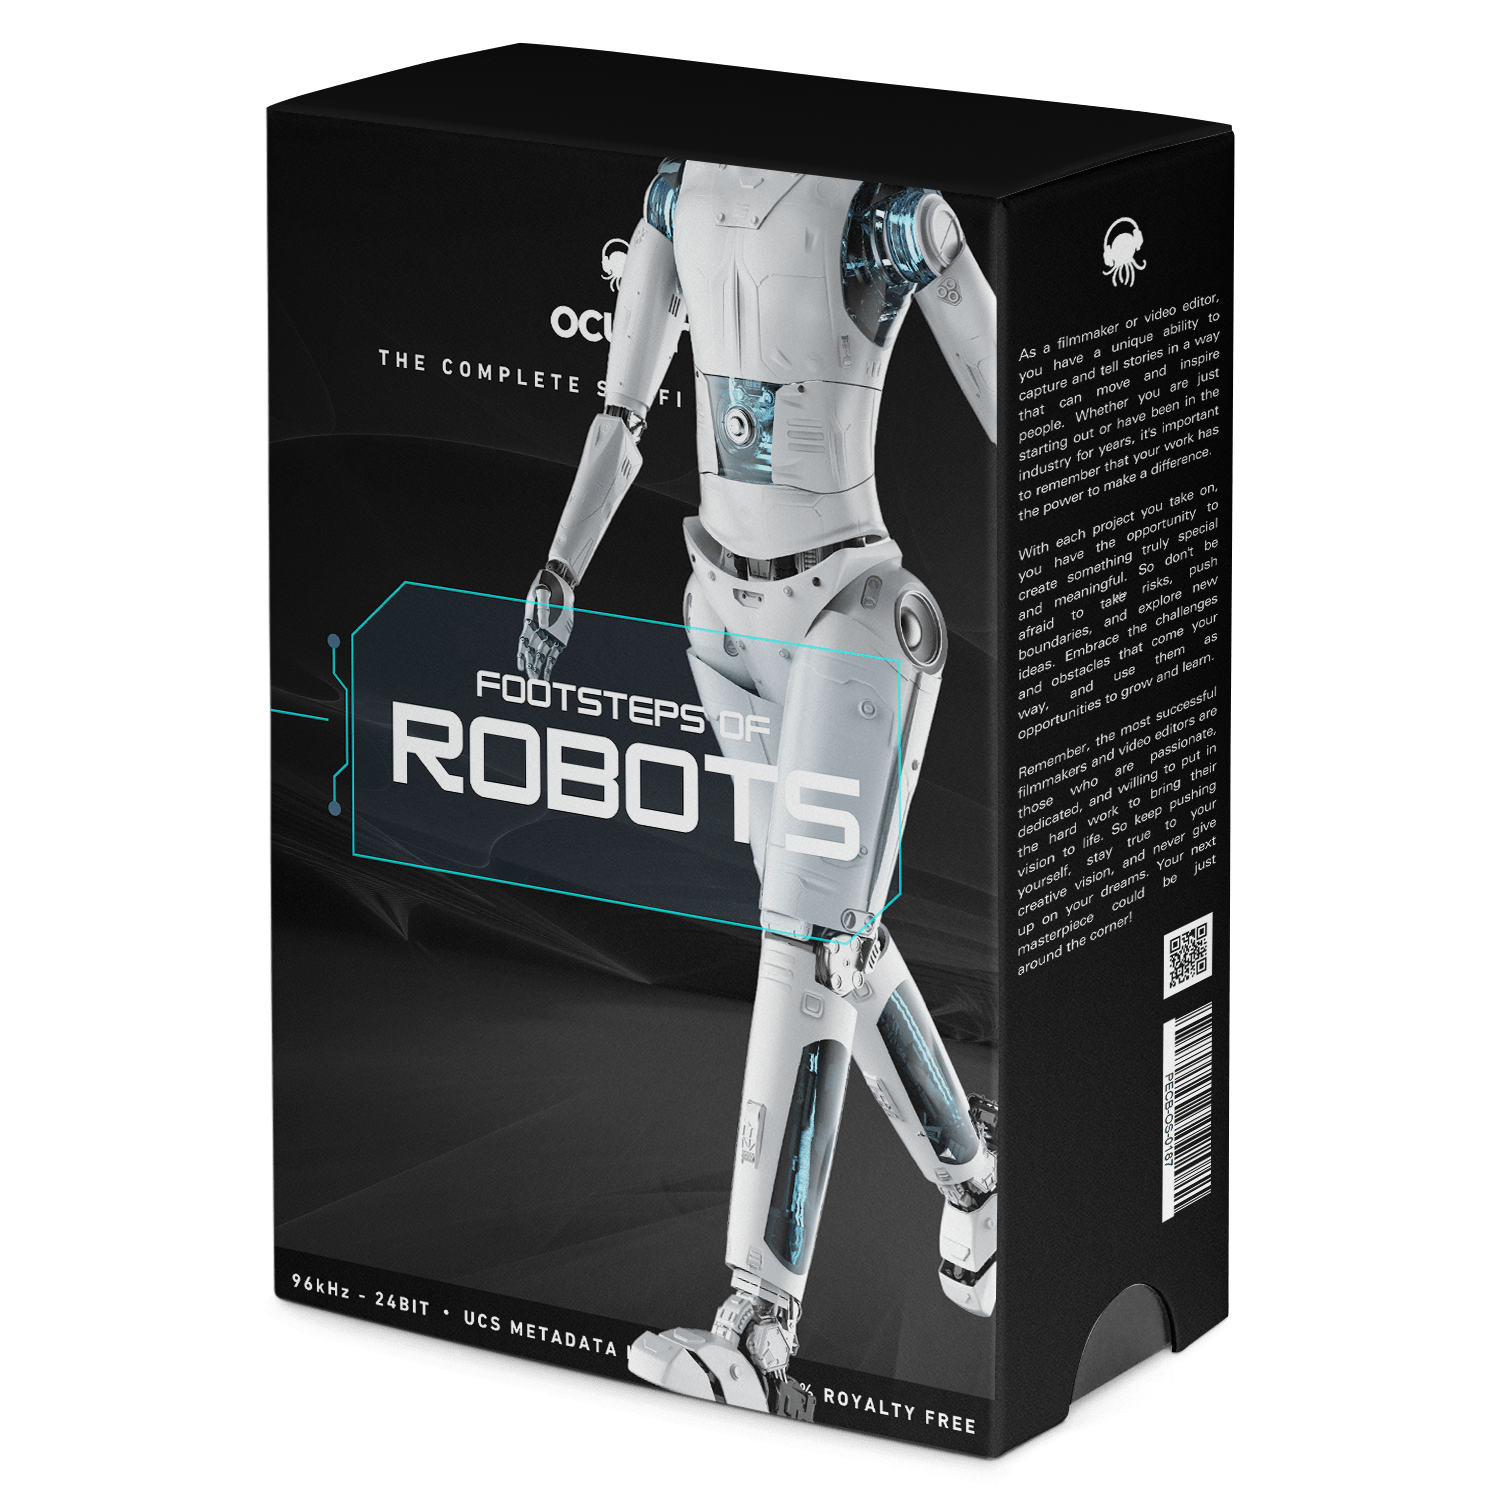 Footsteps of Robots Sound Effects for Video Editing. Professional Sound FX Library.